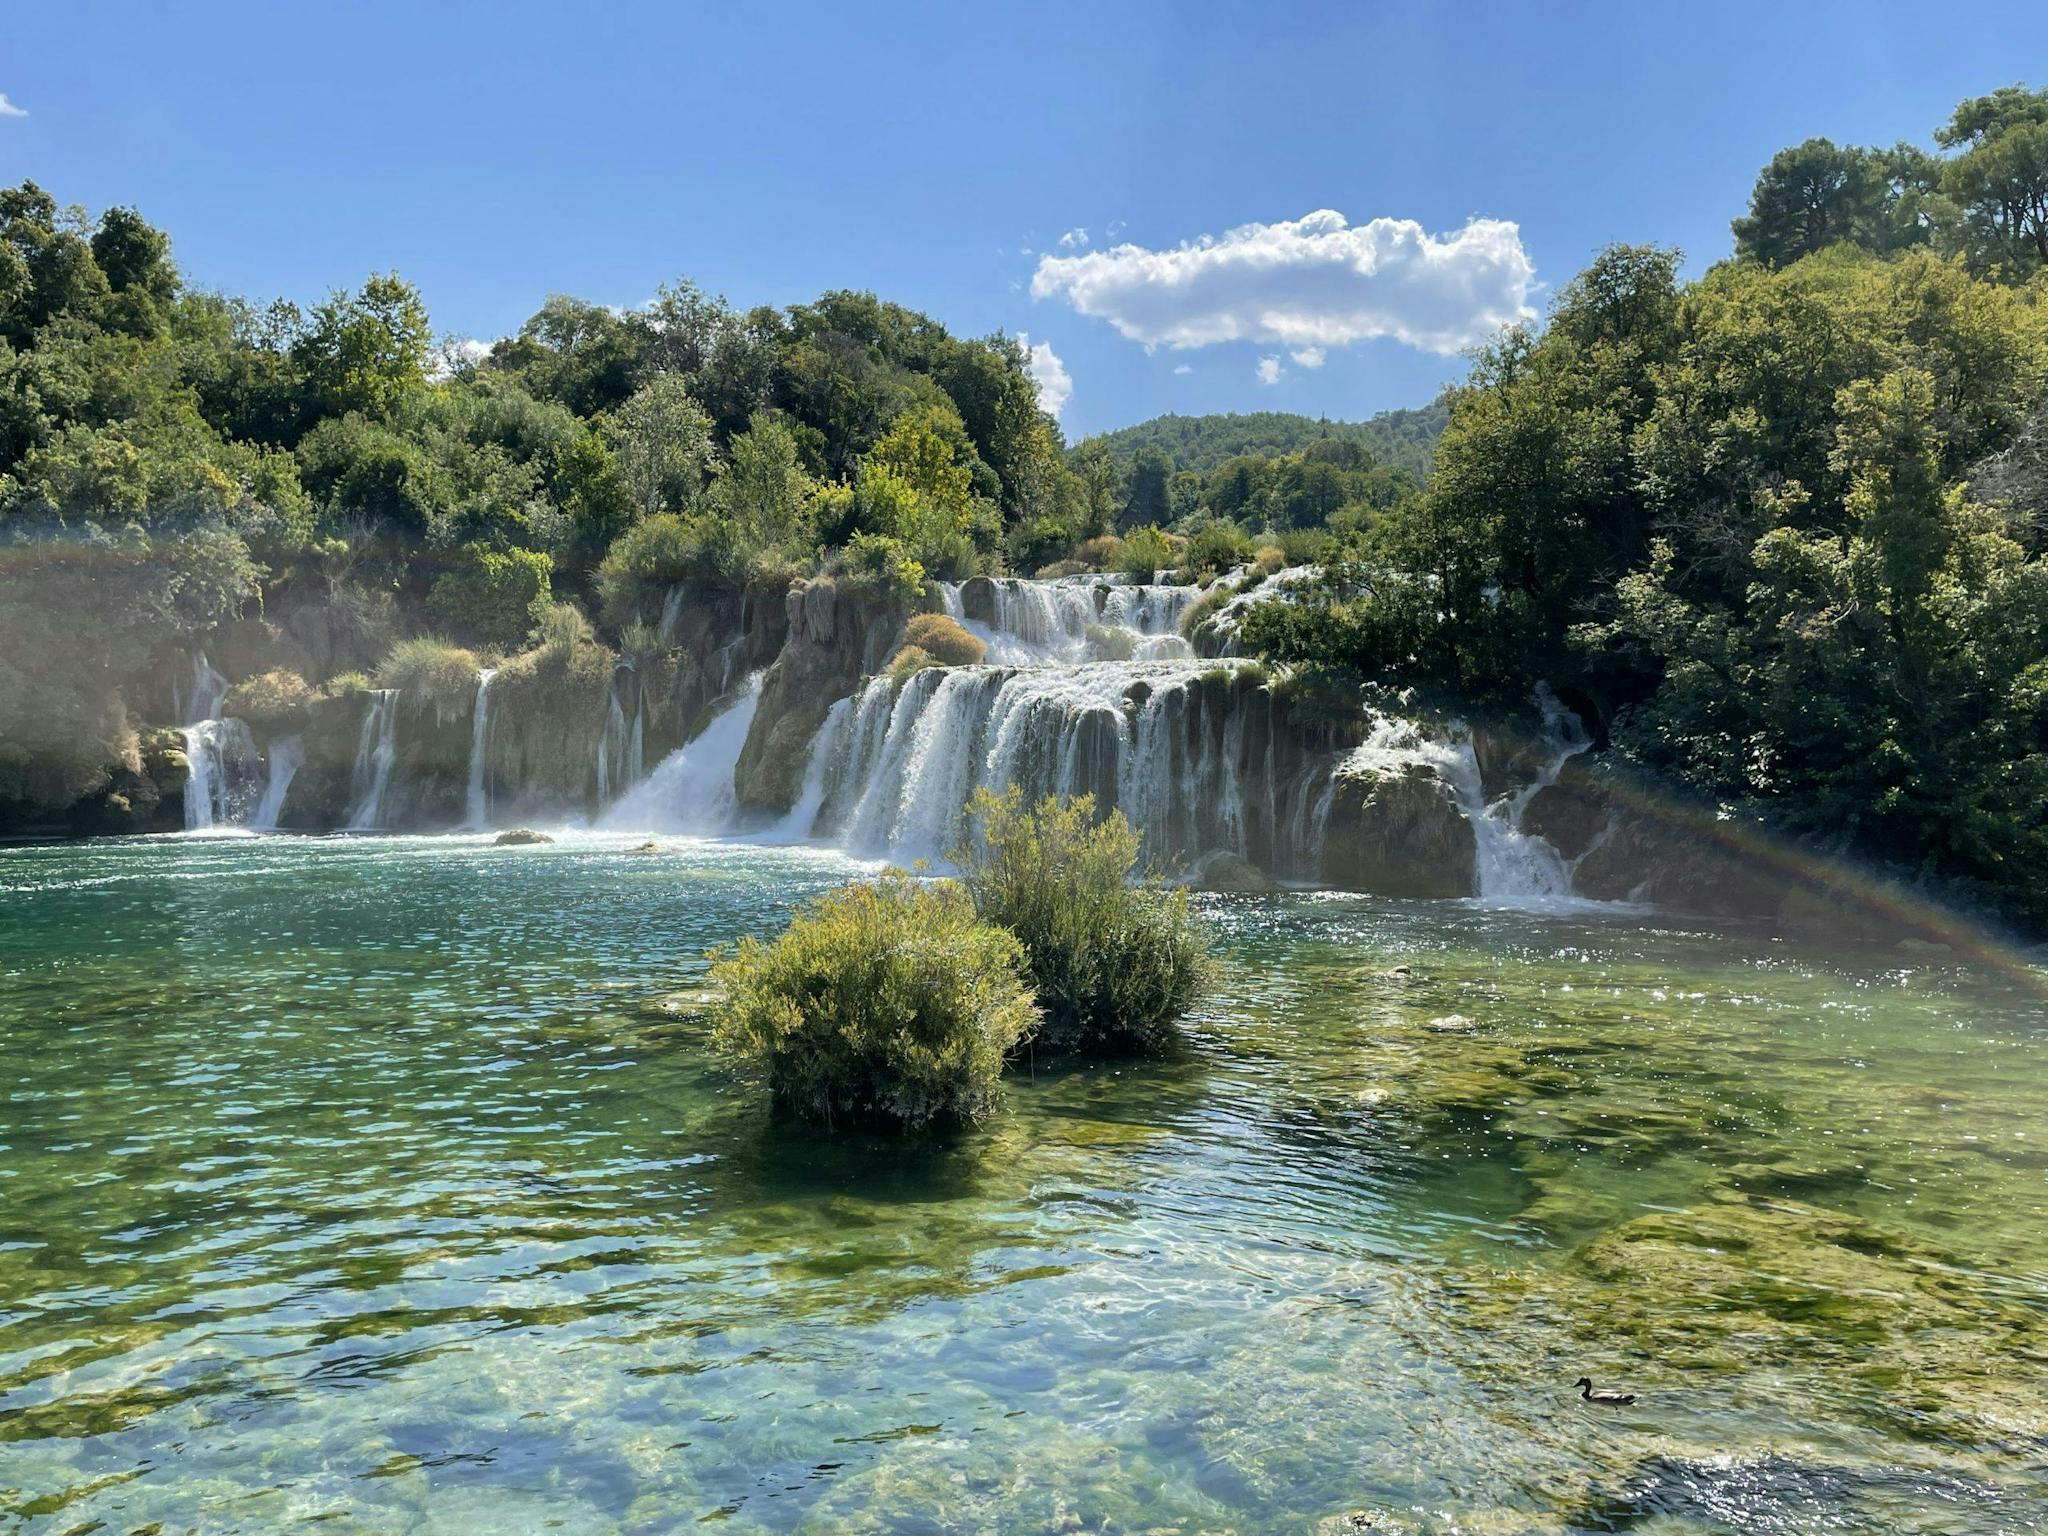 Krka National Park in Croatia - clear, blue-green water in the forefront with a cascading waterfall in the background, surrounded by lush green trees and a blue sky with a white cloud in it. A rainbow crosses the image.